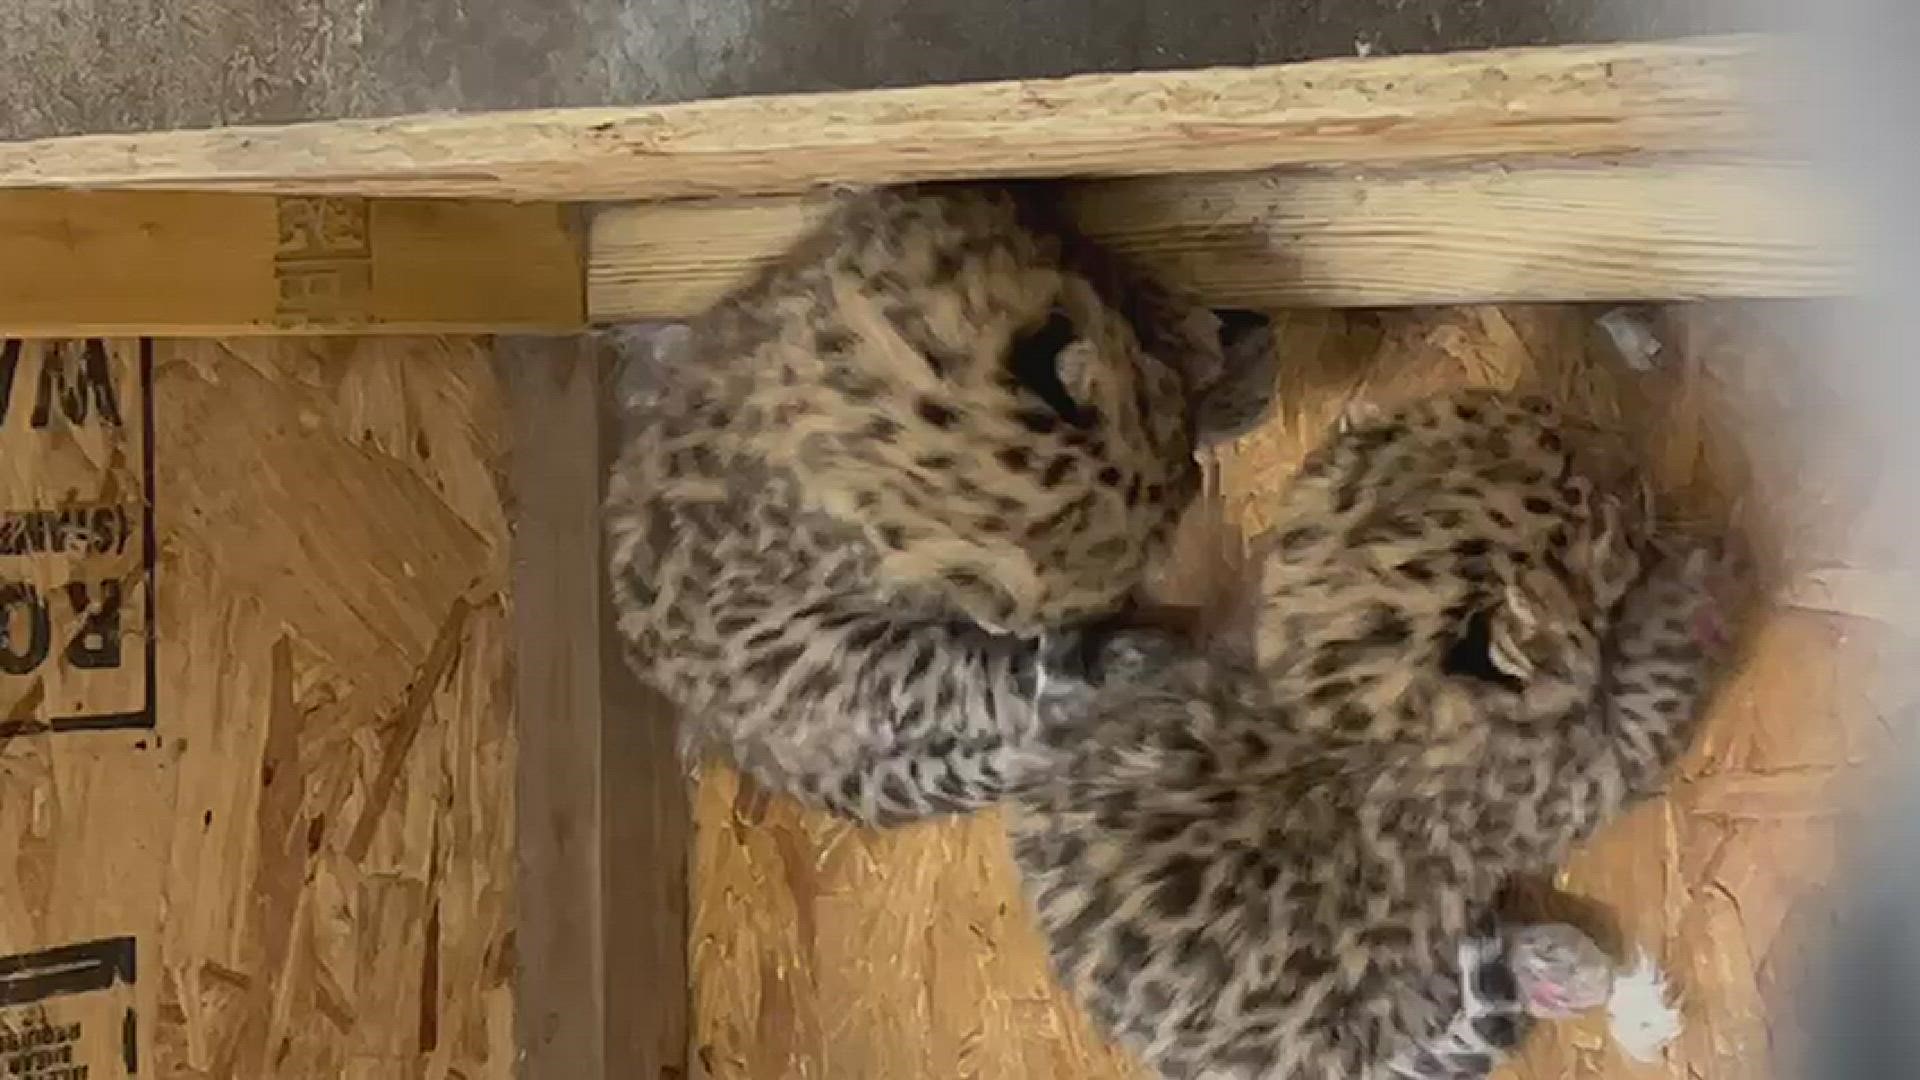 The cubs were born at Niabi Zoo after a successful breeding program for the the most critically endangered big cat in the world.